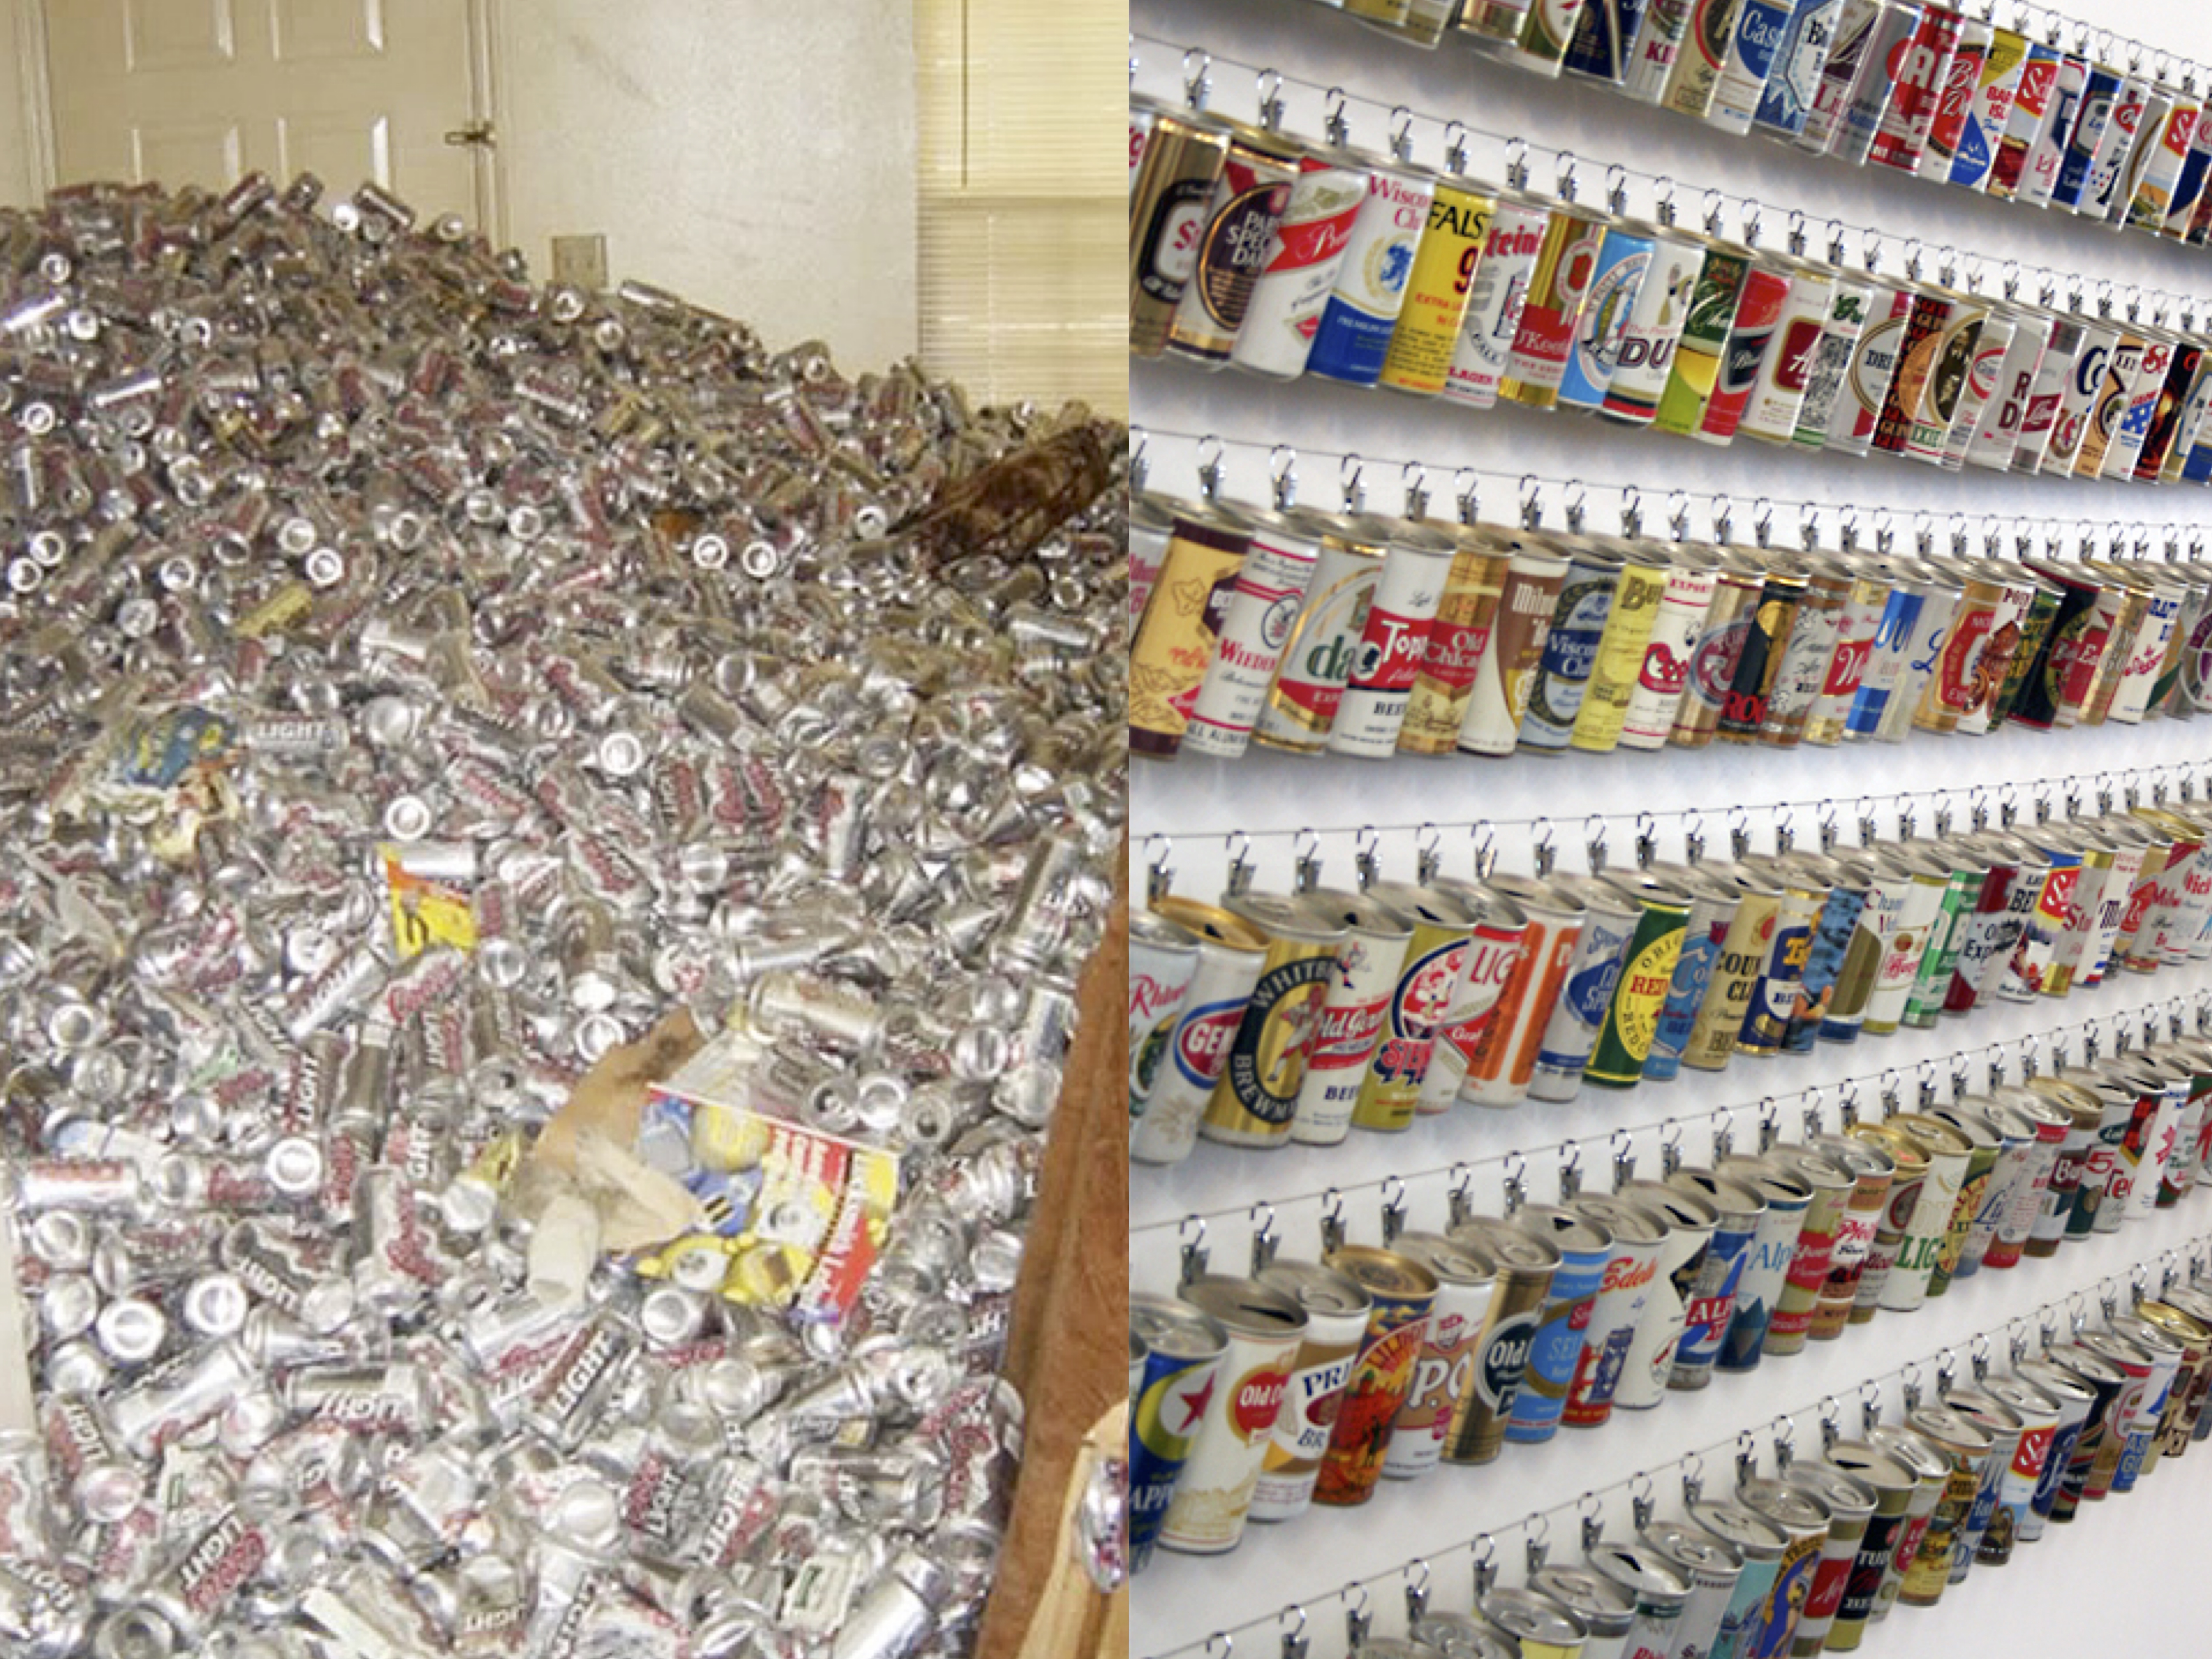 two pictures: one of a room full of cans, and one with cans
neatly hanging on the wall